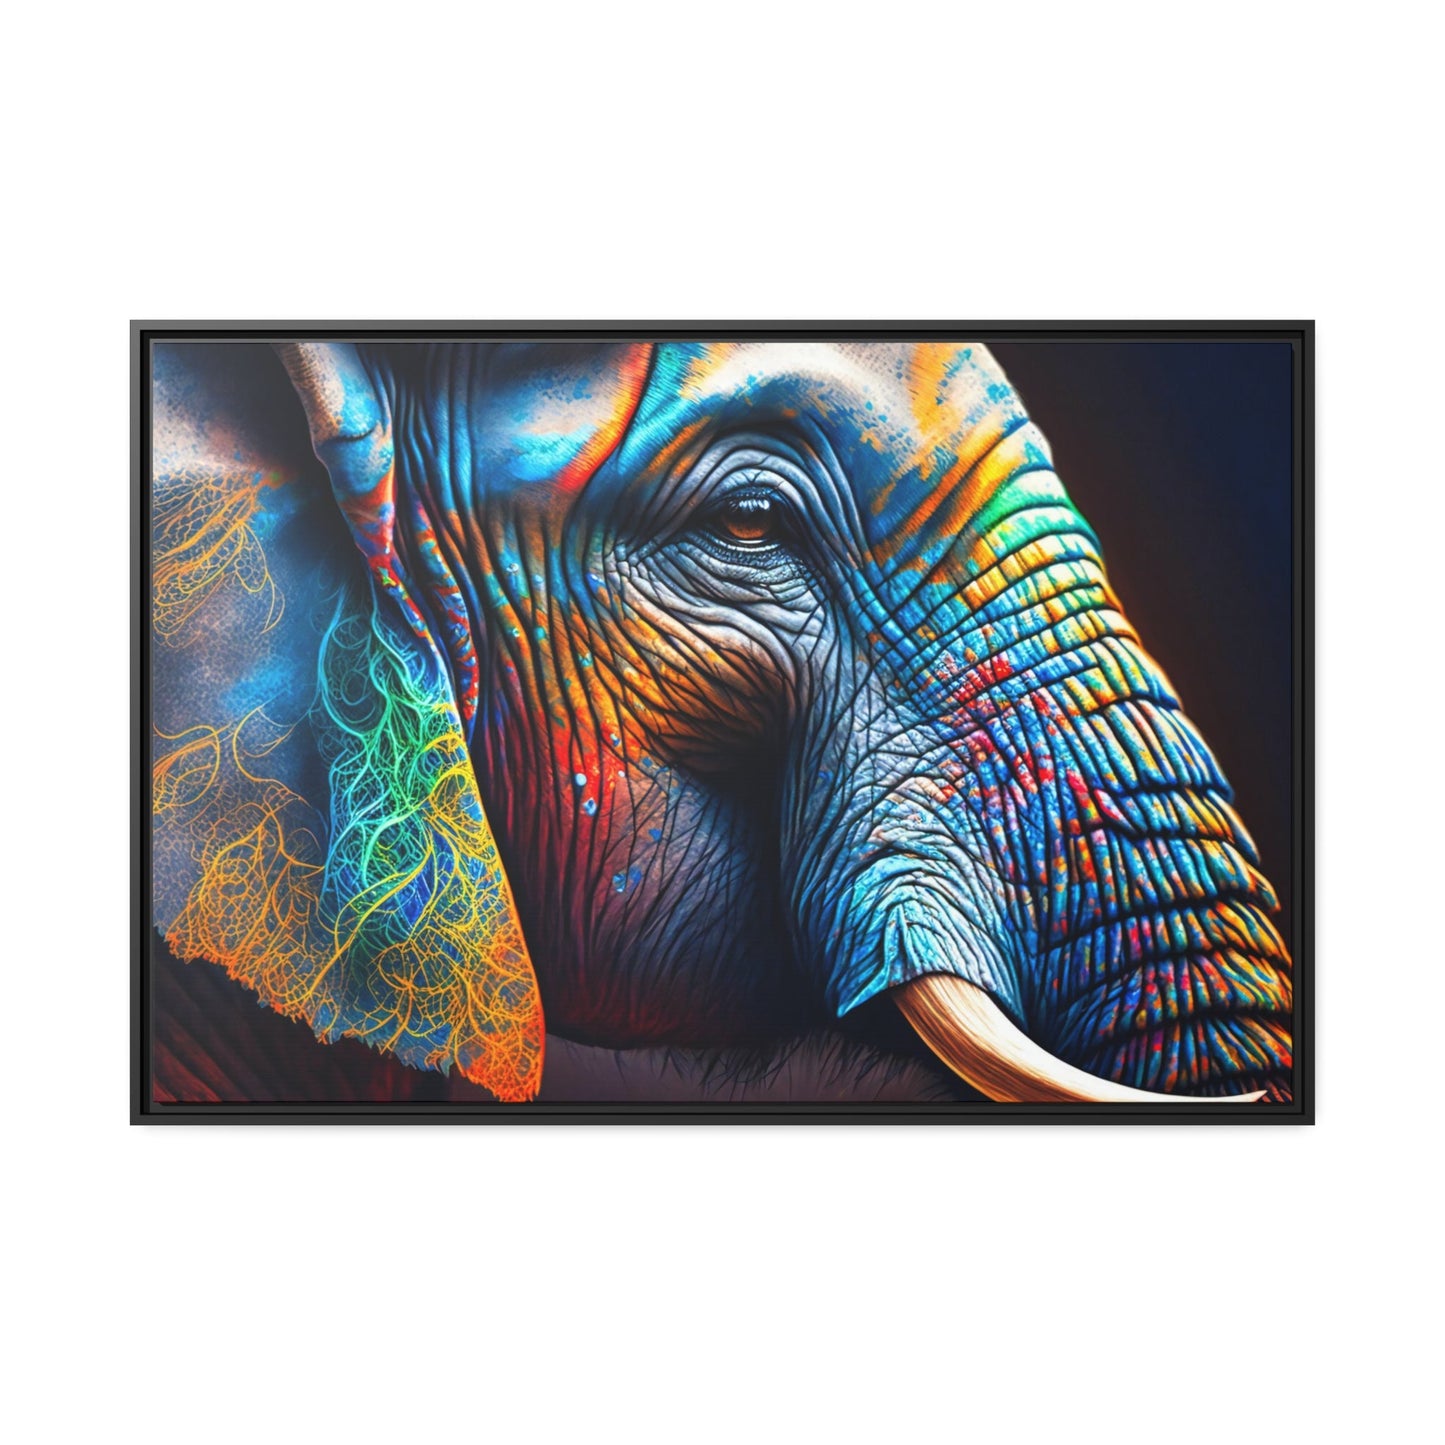 The Majestic Elephant: A Beautiful Canvas Artwork in Detail